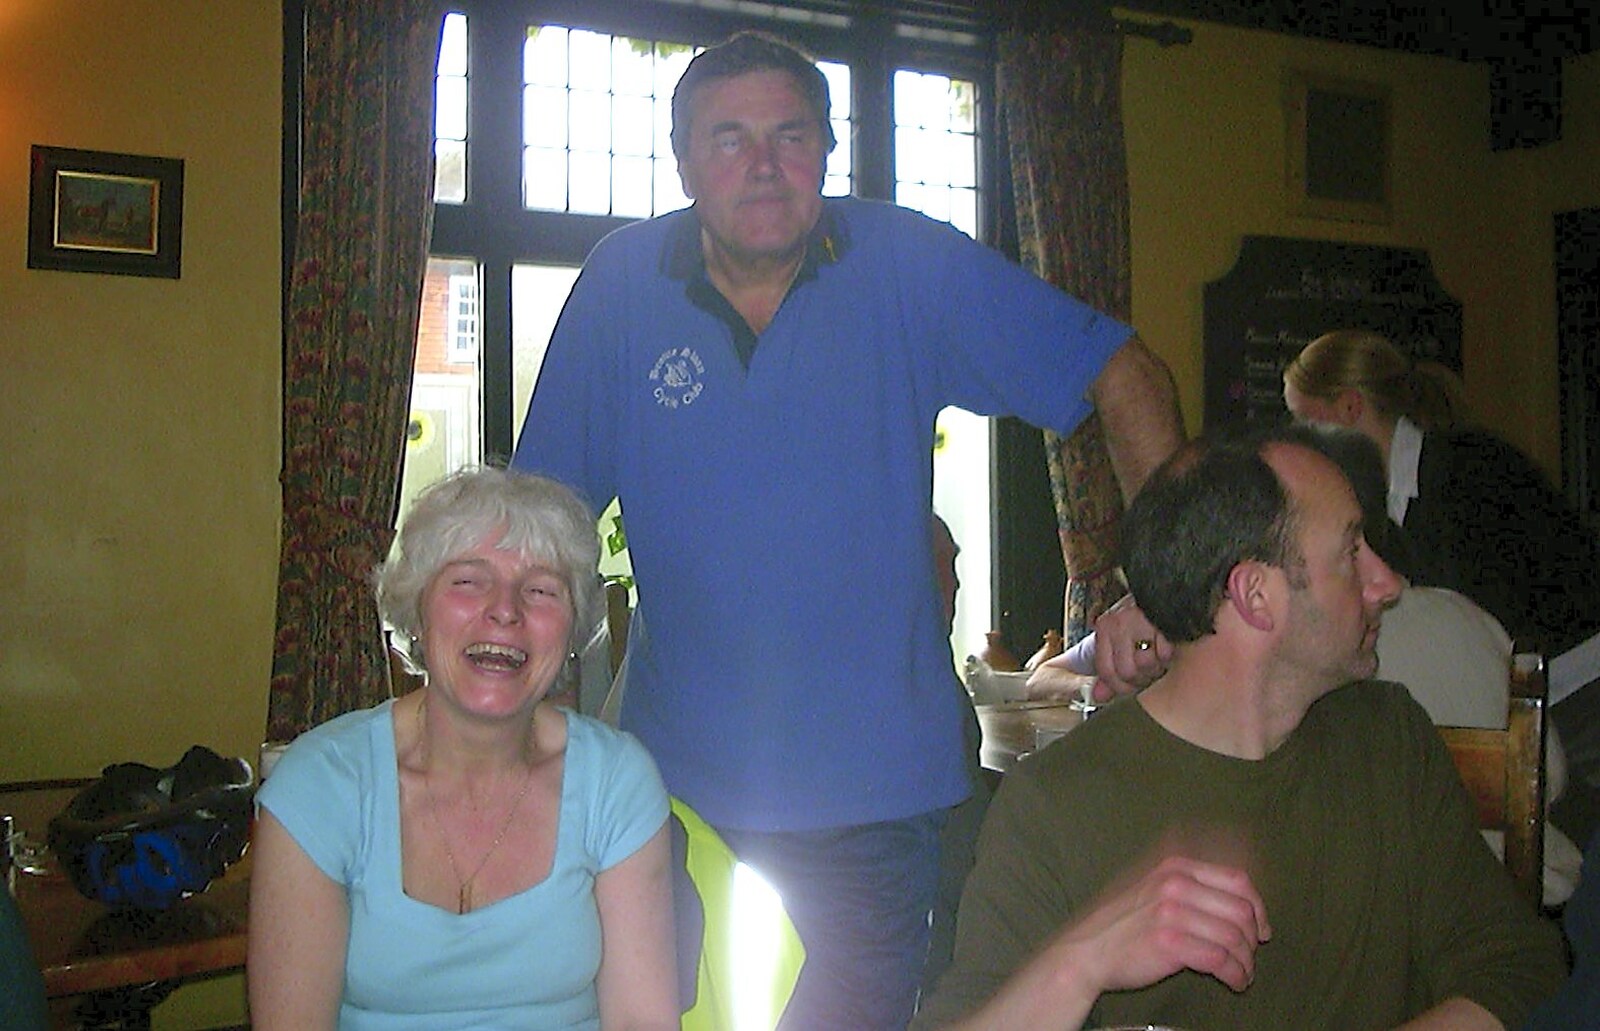 The BSCC Annual Bike Ride, Lenham, Kent - 8th May 2004: Spammy and Alan in the Vine Inn